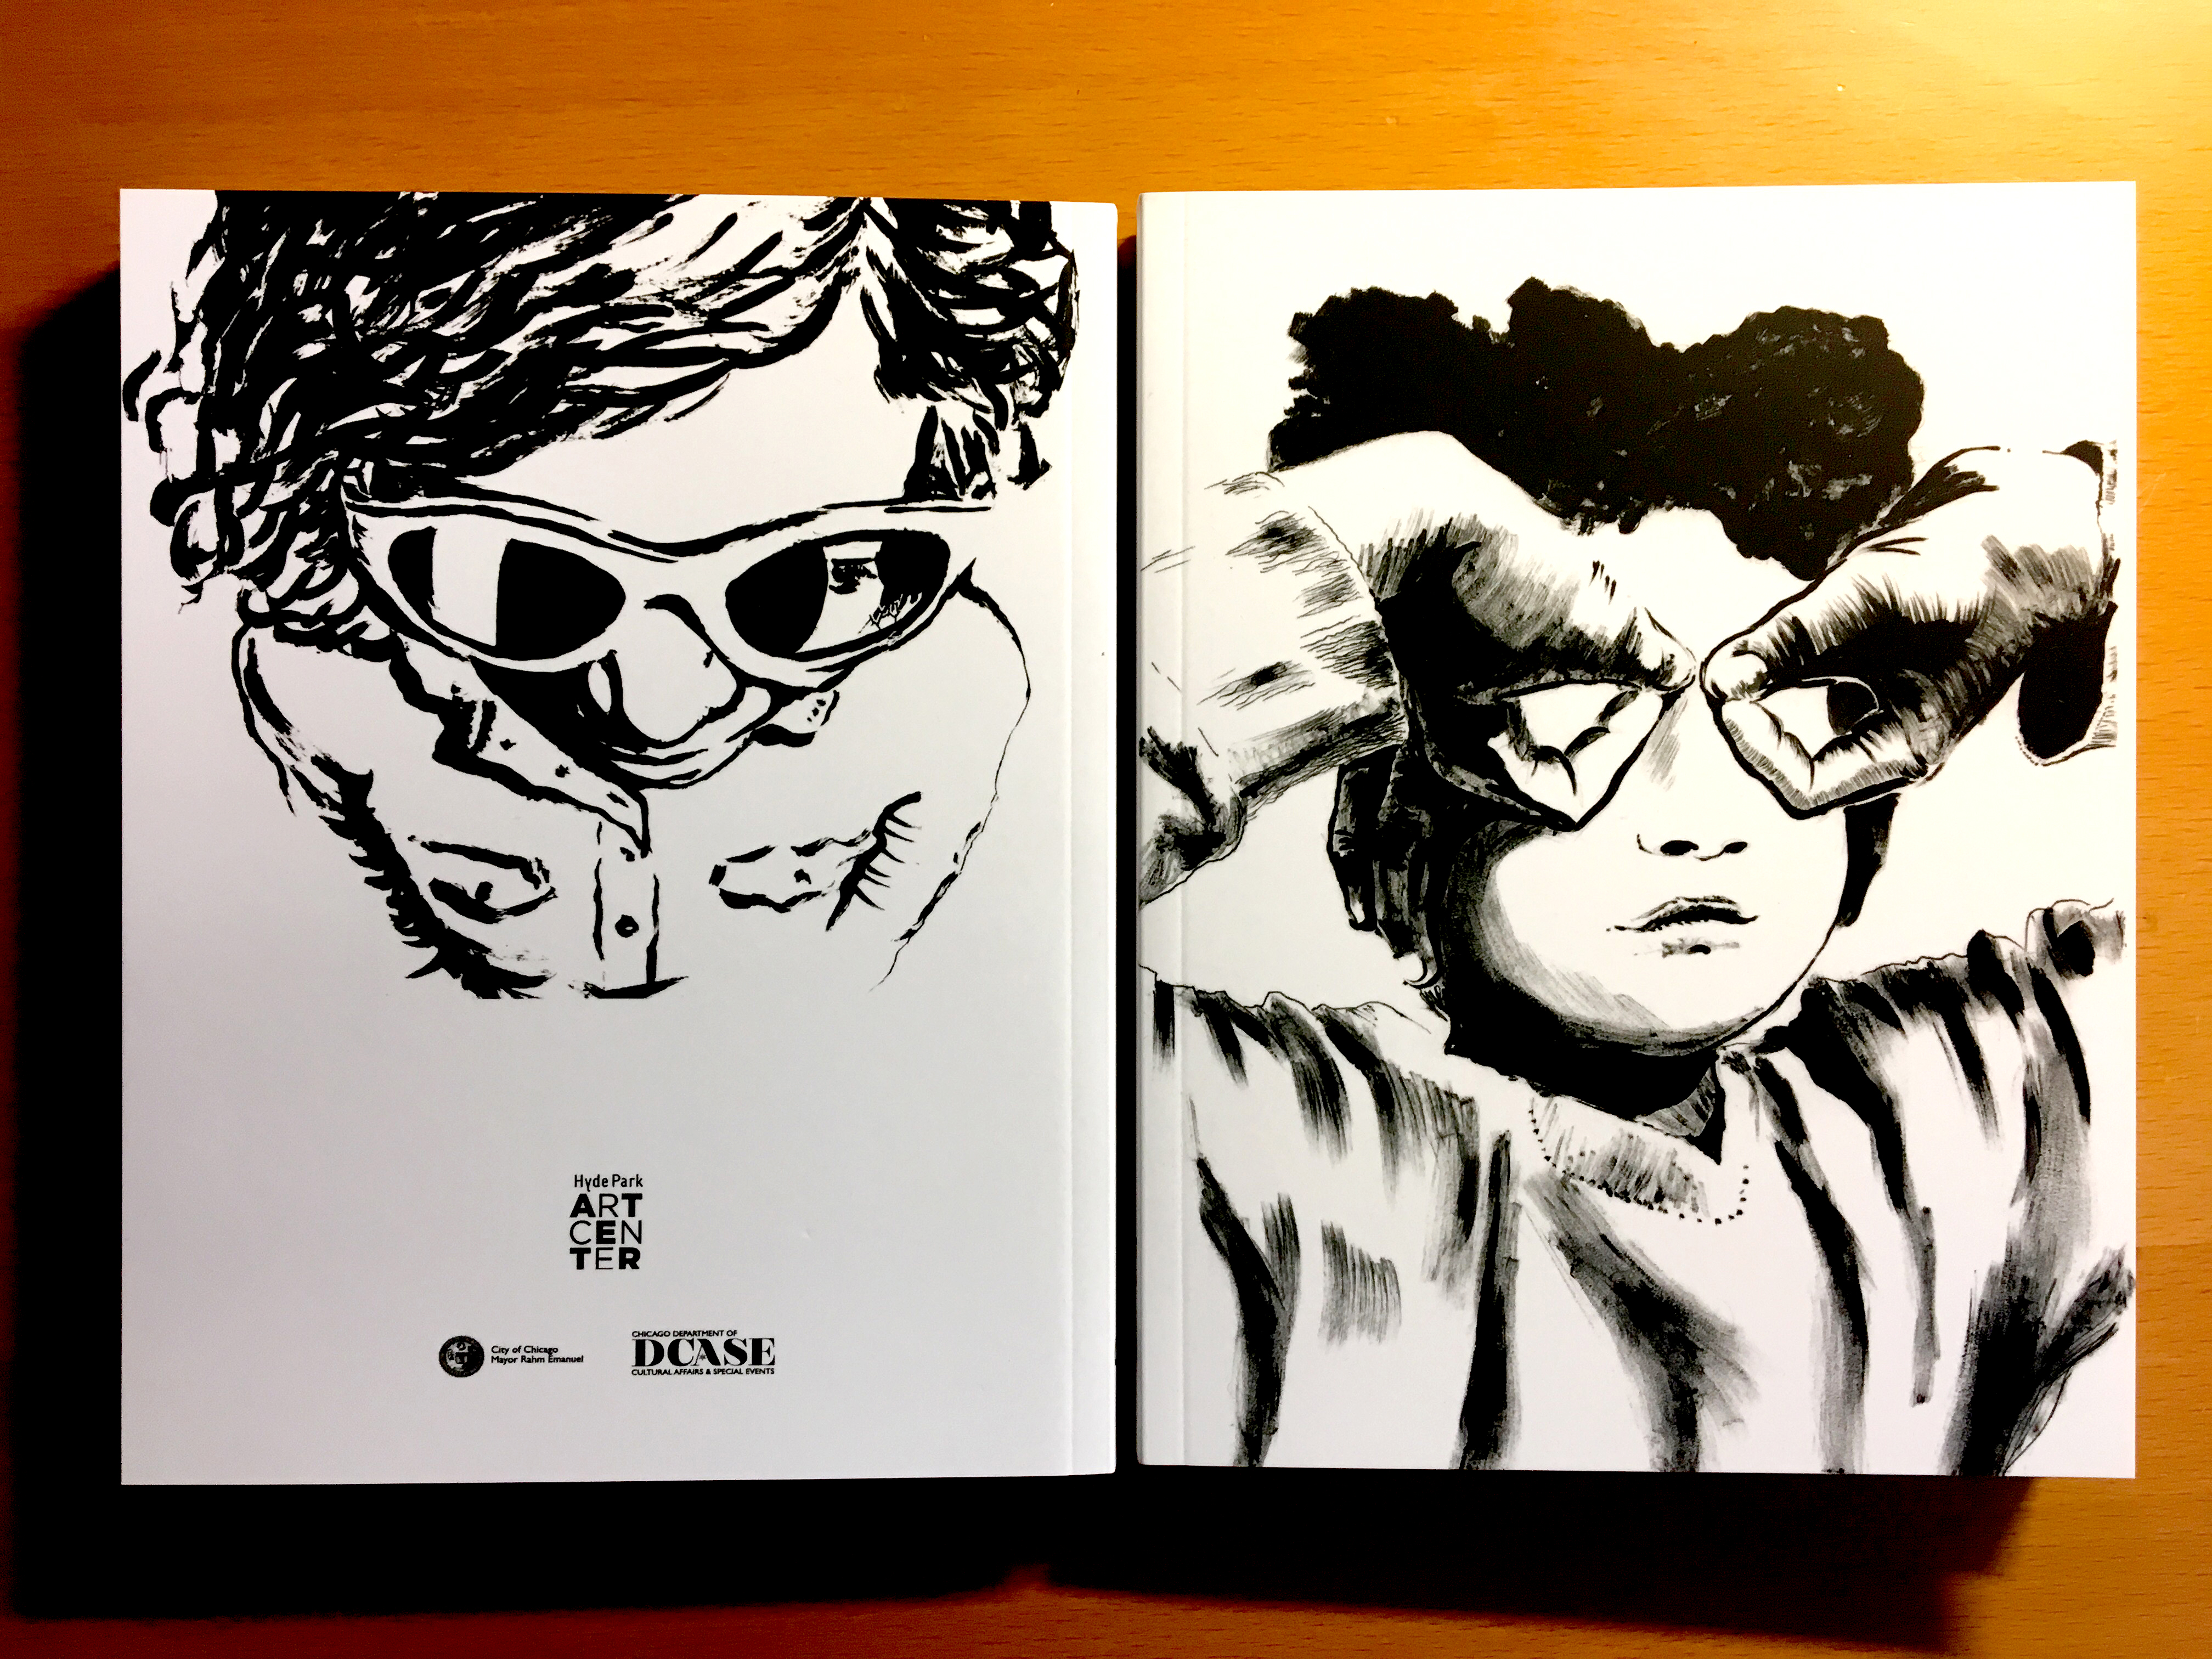 Two copies of the book lie side by side and flat against a wood background. The copy on the left shows the back cover, an ink drawing of a young girl from above, from her head to her abdomen and then fading into the background. She wears a button-up shirt and sunglasses, the left lens of which is cracked. Her left eye is partially visible. At the bottom of the back cover are logos for the Hyde Park Art Center, the City of Chicago, and the Chicago Department of Cultural Affairs and Special Events. The copy on the right shows the front cover, which is an ink illustration of a young boy in close-up, straight-on, showing his face, chest, and parts of his arms. He wears a long-sleeved shirt and his hands are flipped upside-down over his eyes to form goggles, of sorts, with each thumb and forefinger. Courtesy of the artist.